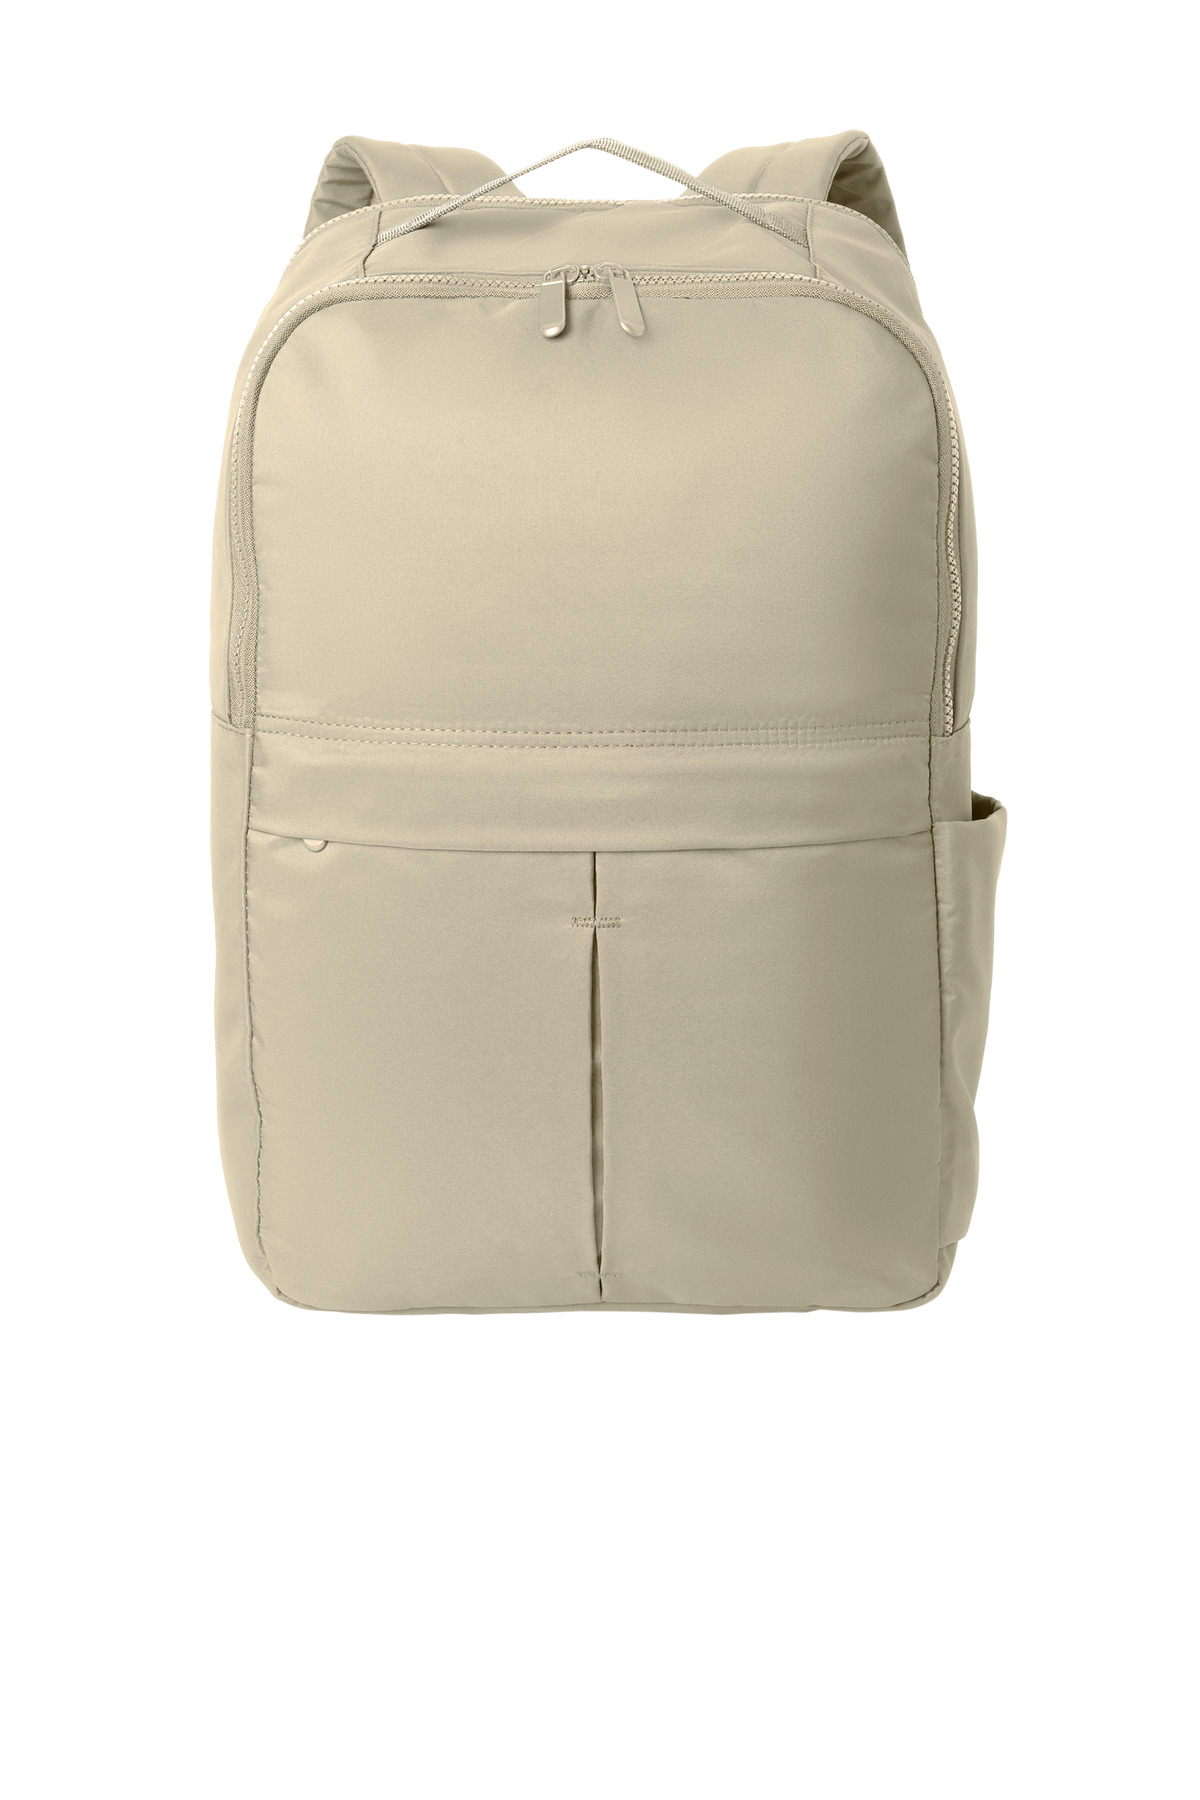 Port Authority Matte Backpack-Port Authority